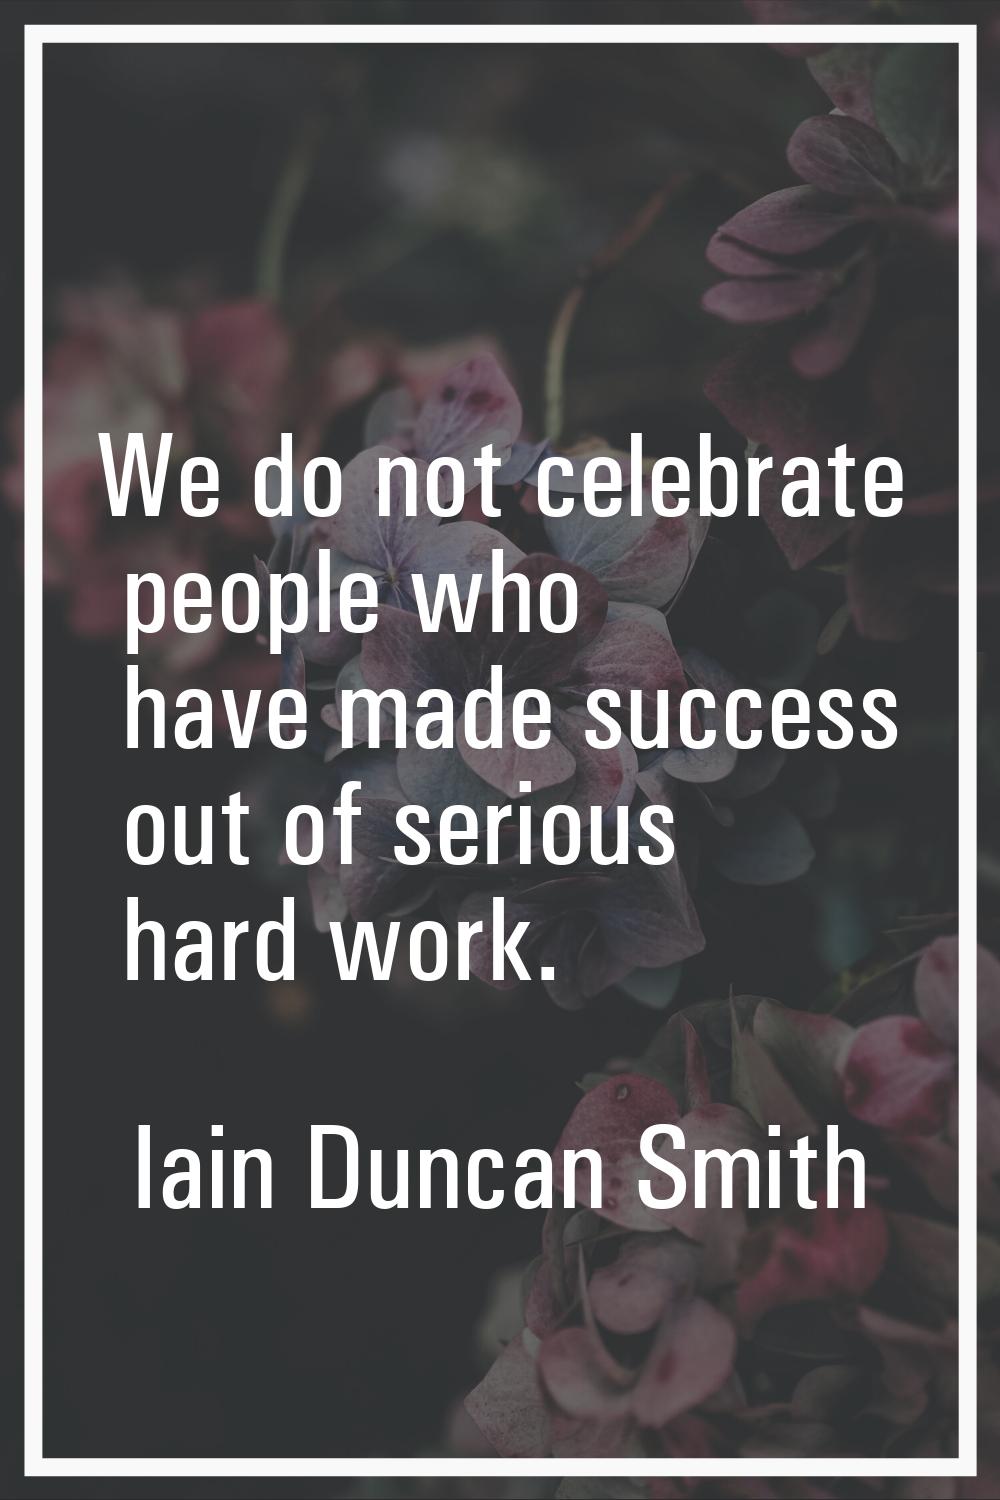 We do not celebrate people who have made success out of serious hard work.